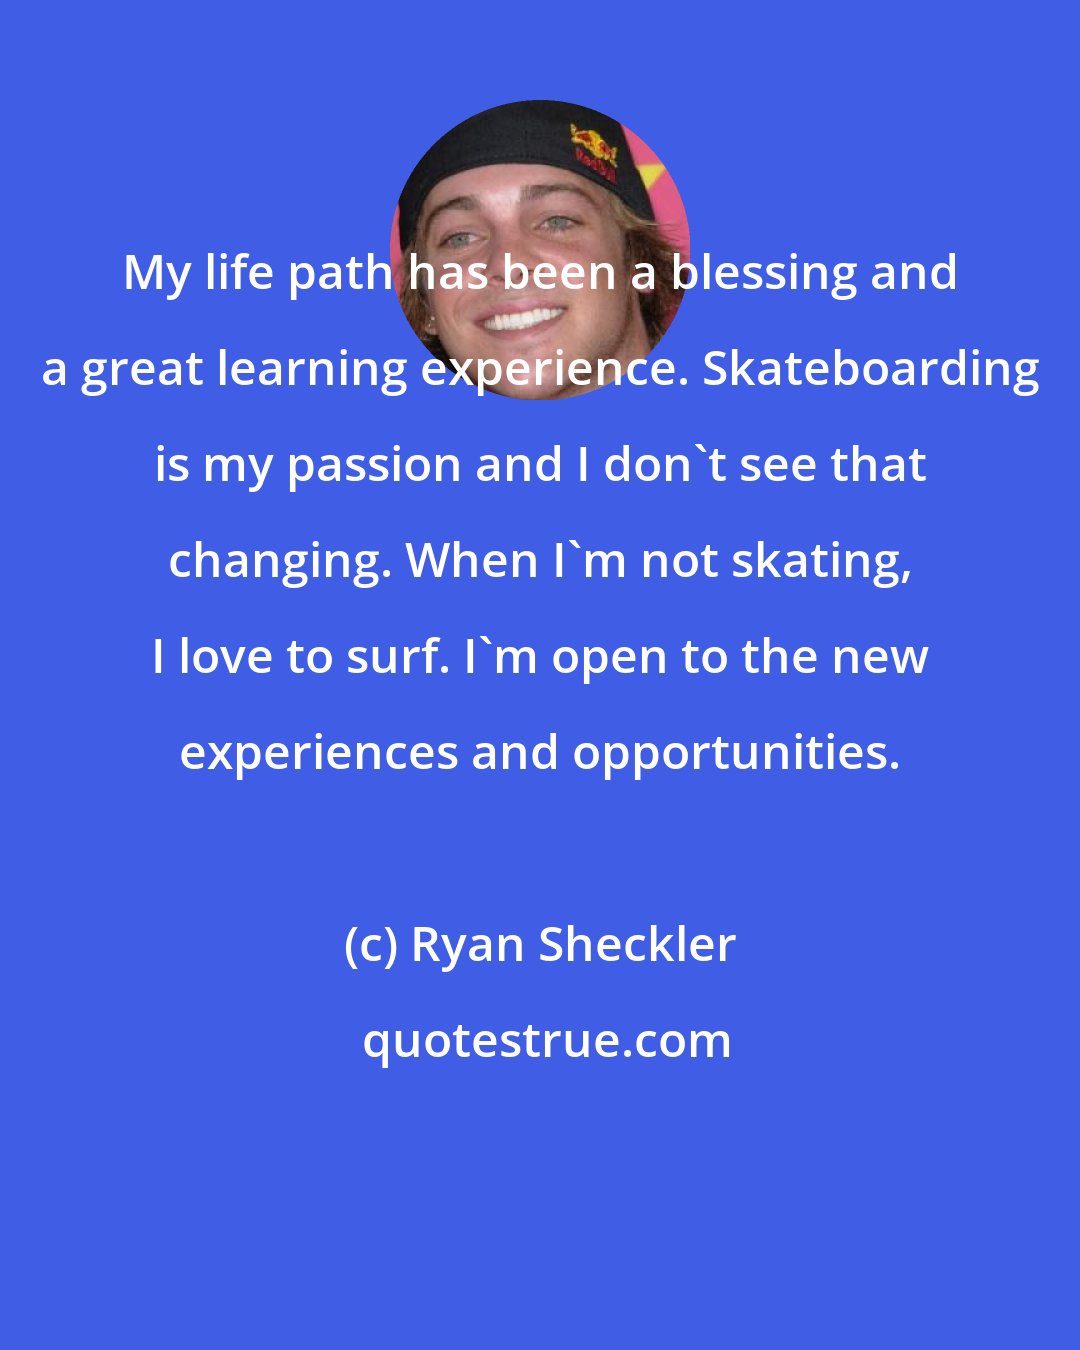 Ryan Sheckler: My life path has been a blessing and a great learning experience. Skateboarding is my passion and I don't see that changing. When I'm not skating, I love to surf. I'm open to the new experiences and opportunities.